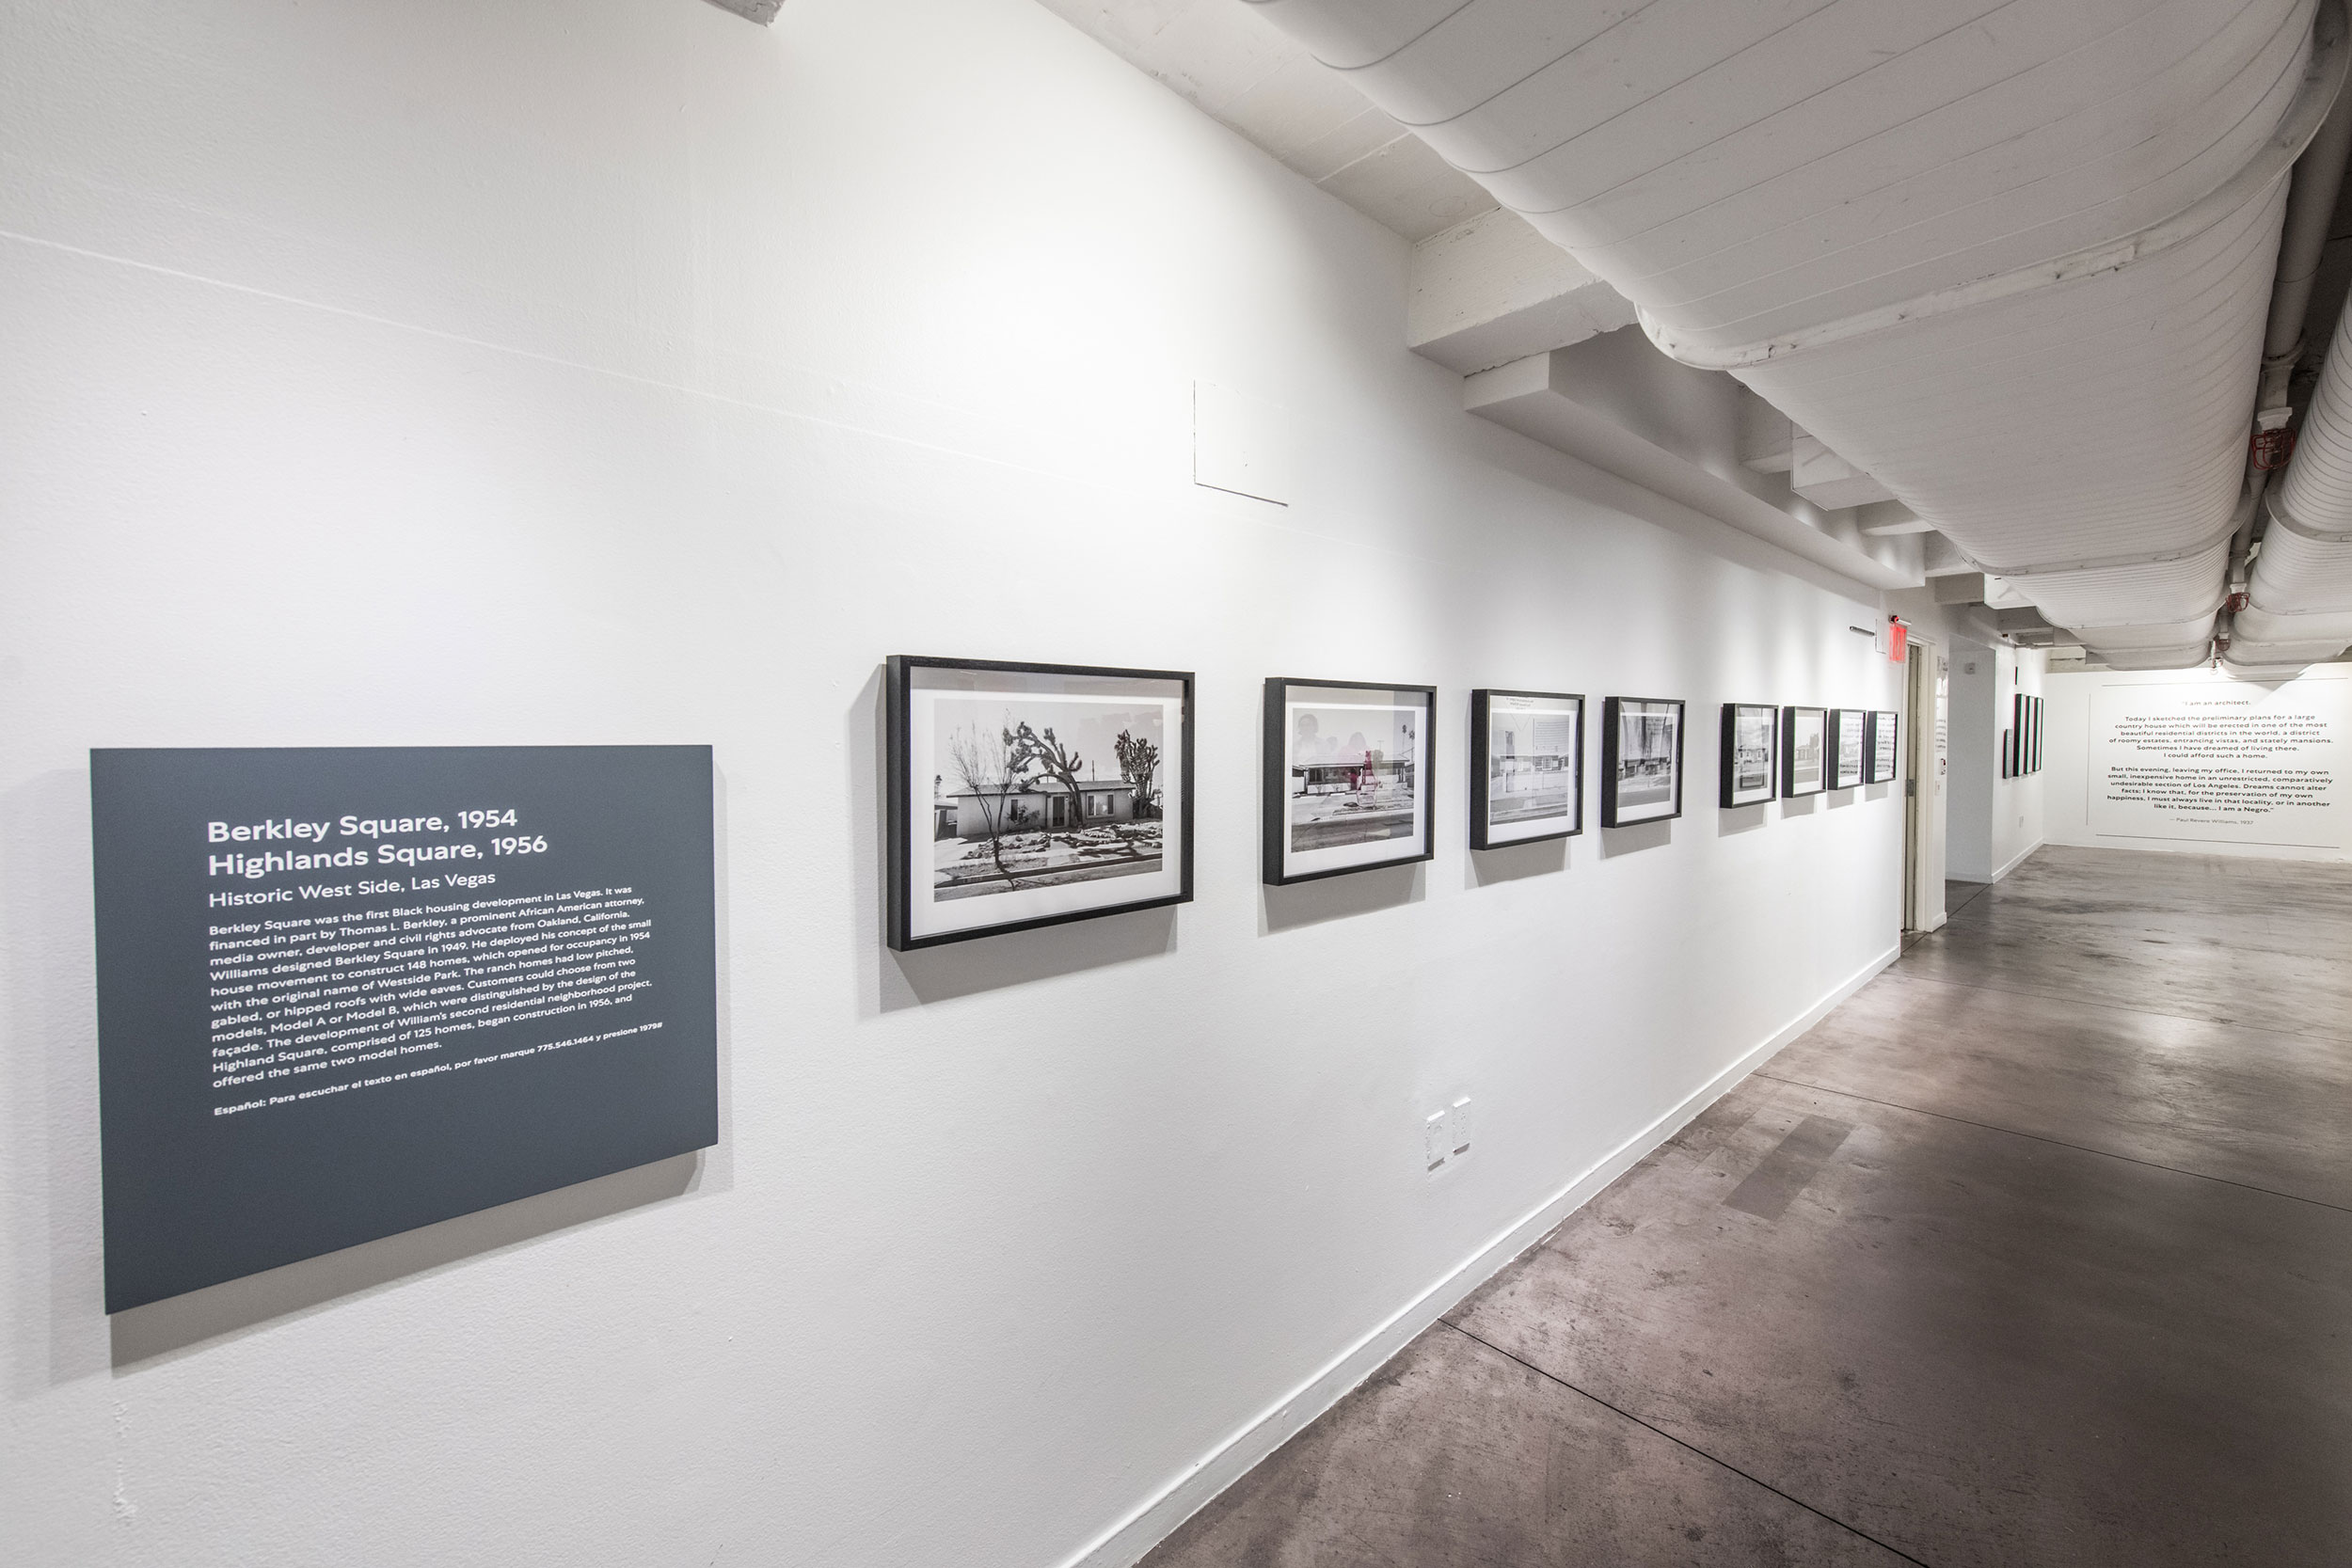 Installation view, Janna Ireland on the Architectural Legacy of Paul Revere Williams in Nevada, Center for Architecture